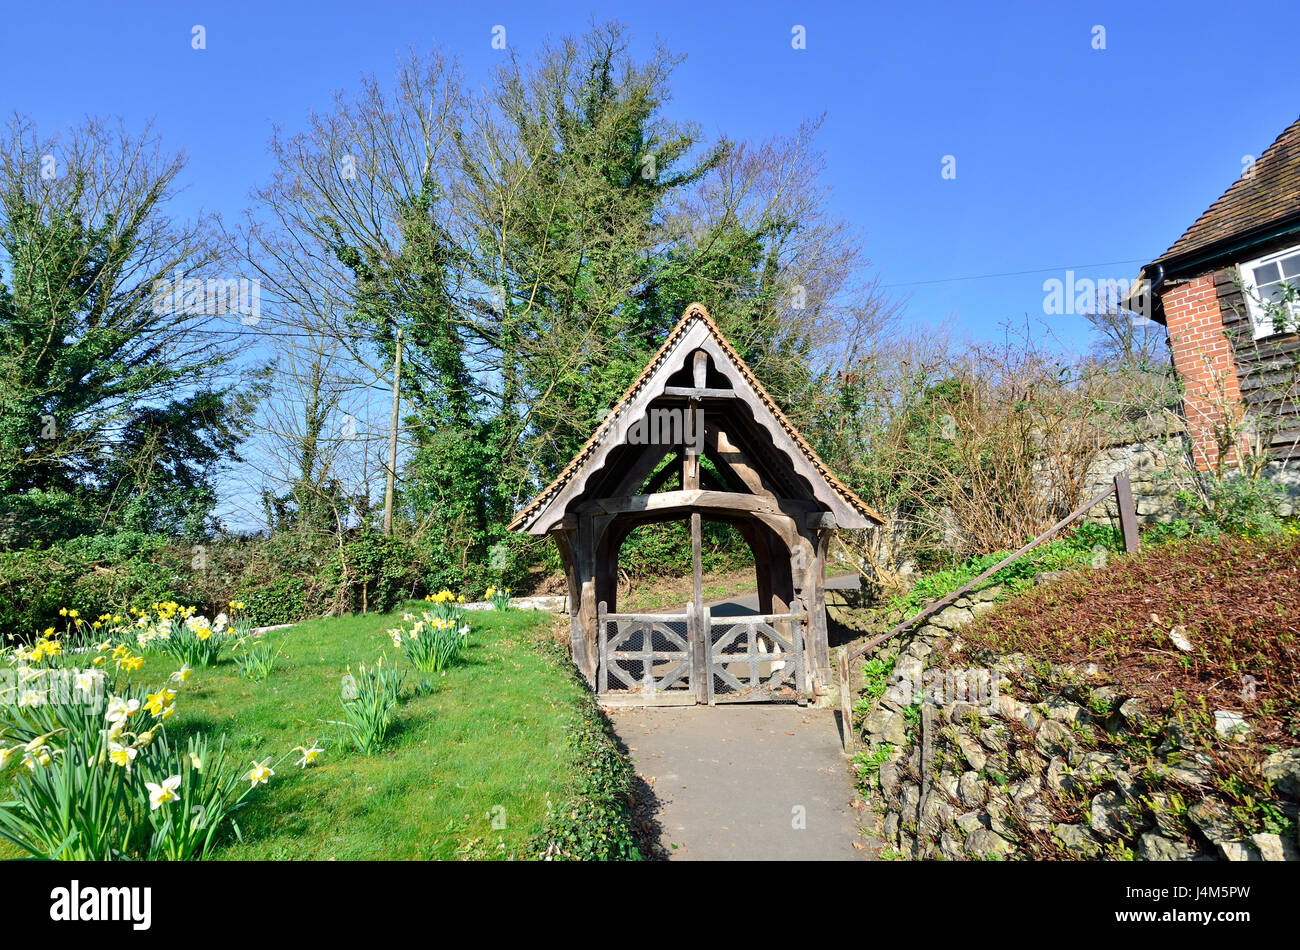 Boughton Monchelsea village, Kent, England. St Peter's Church yard - 16thC (or earlier) lychgate. Grade II listed building Stock Photo